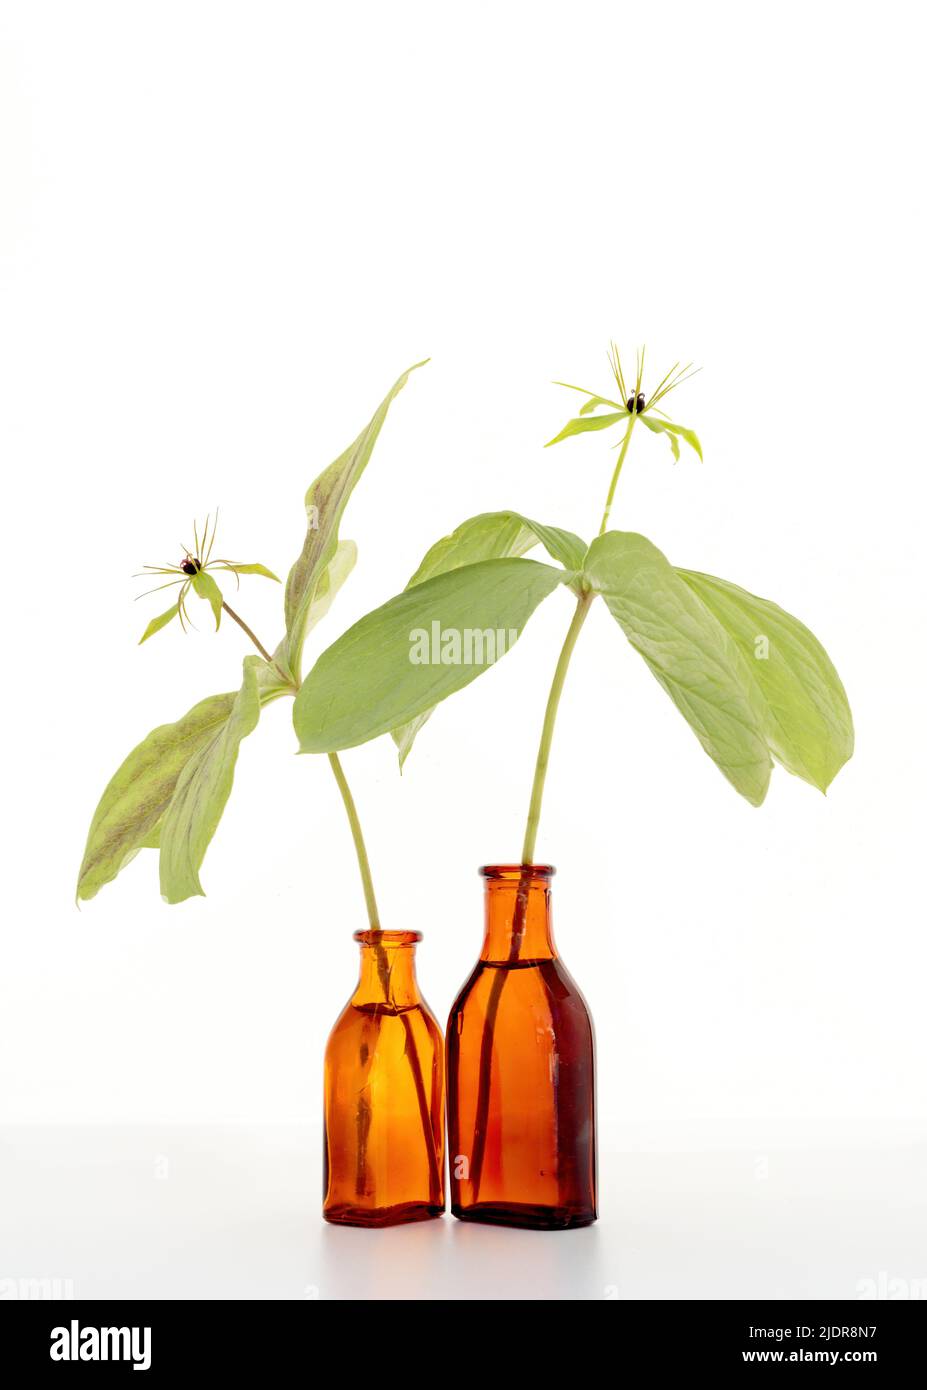 Two poisonous herb paris plants in old bottles Stock Photo